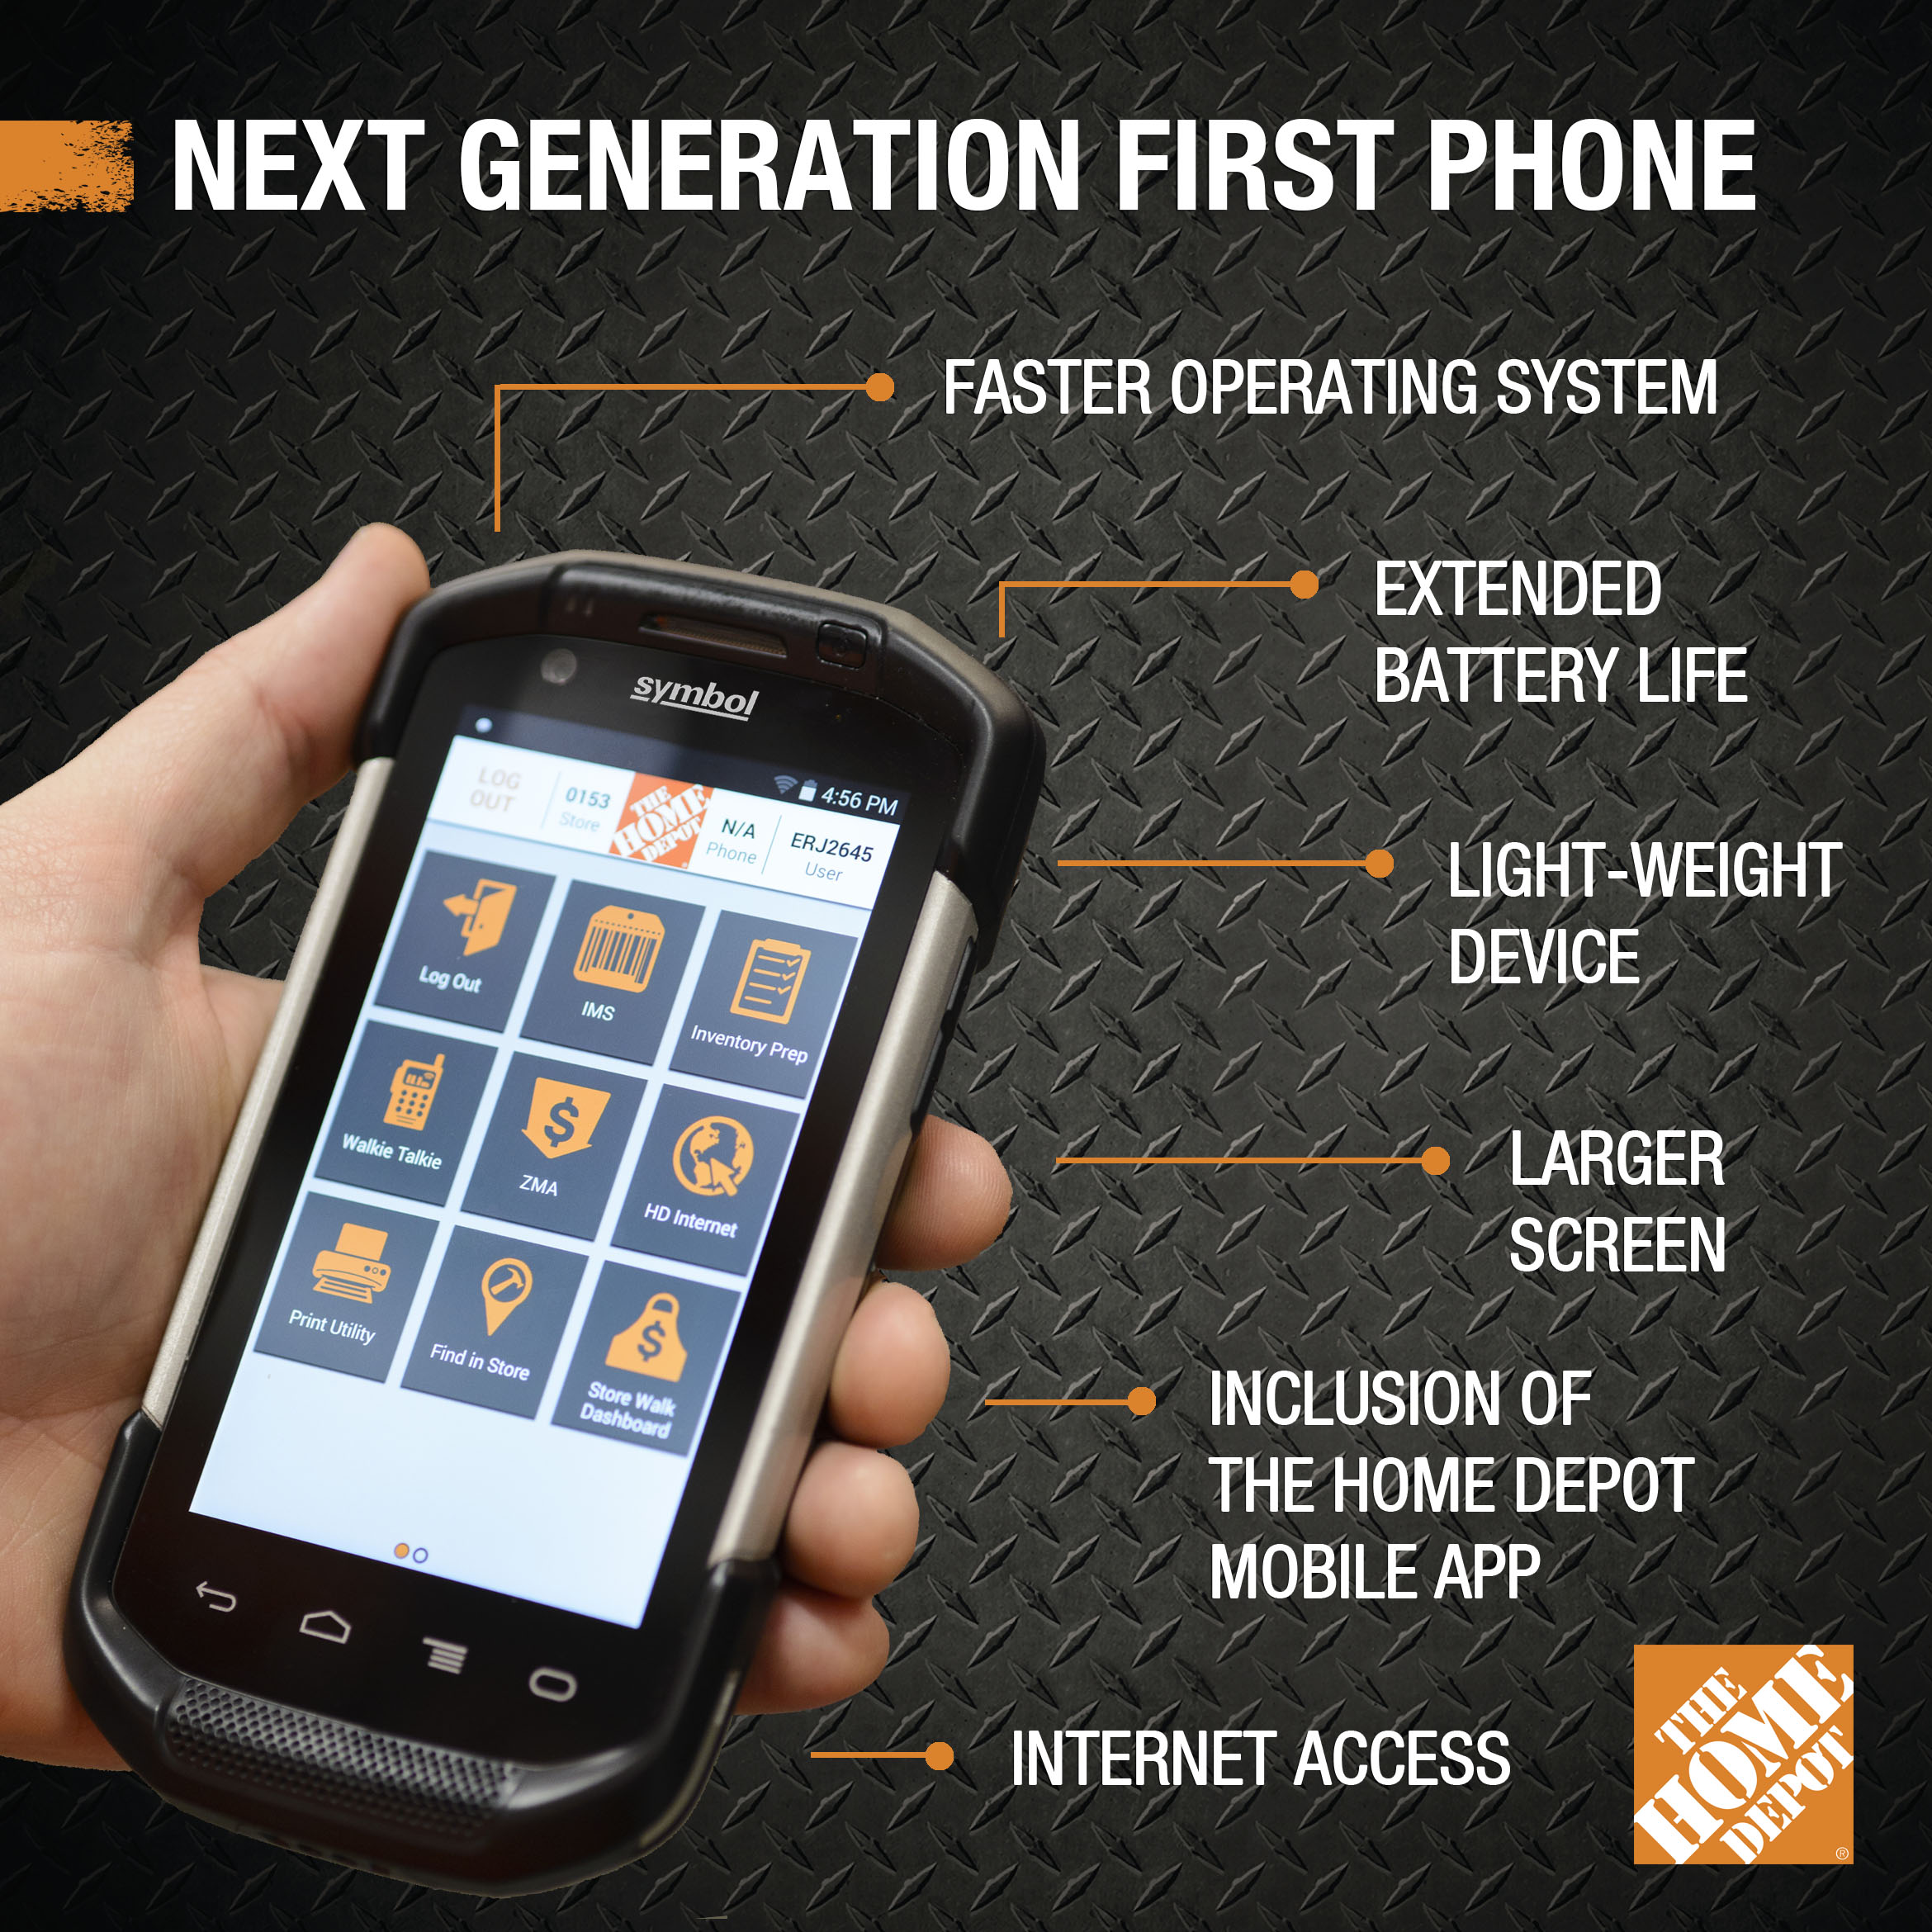 Next Generation First Phone Infographic 